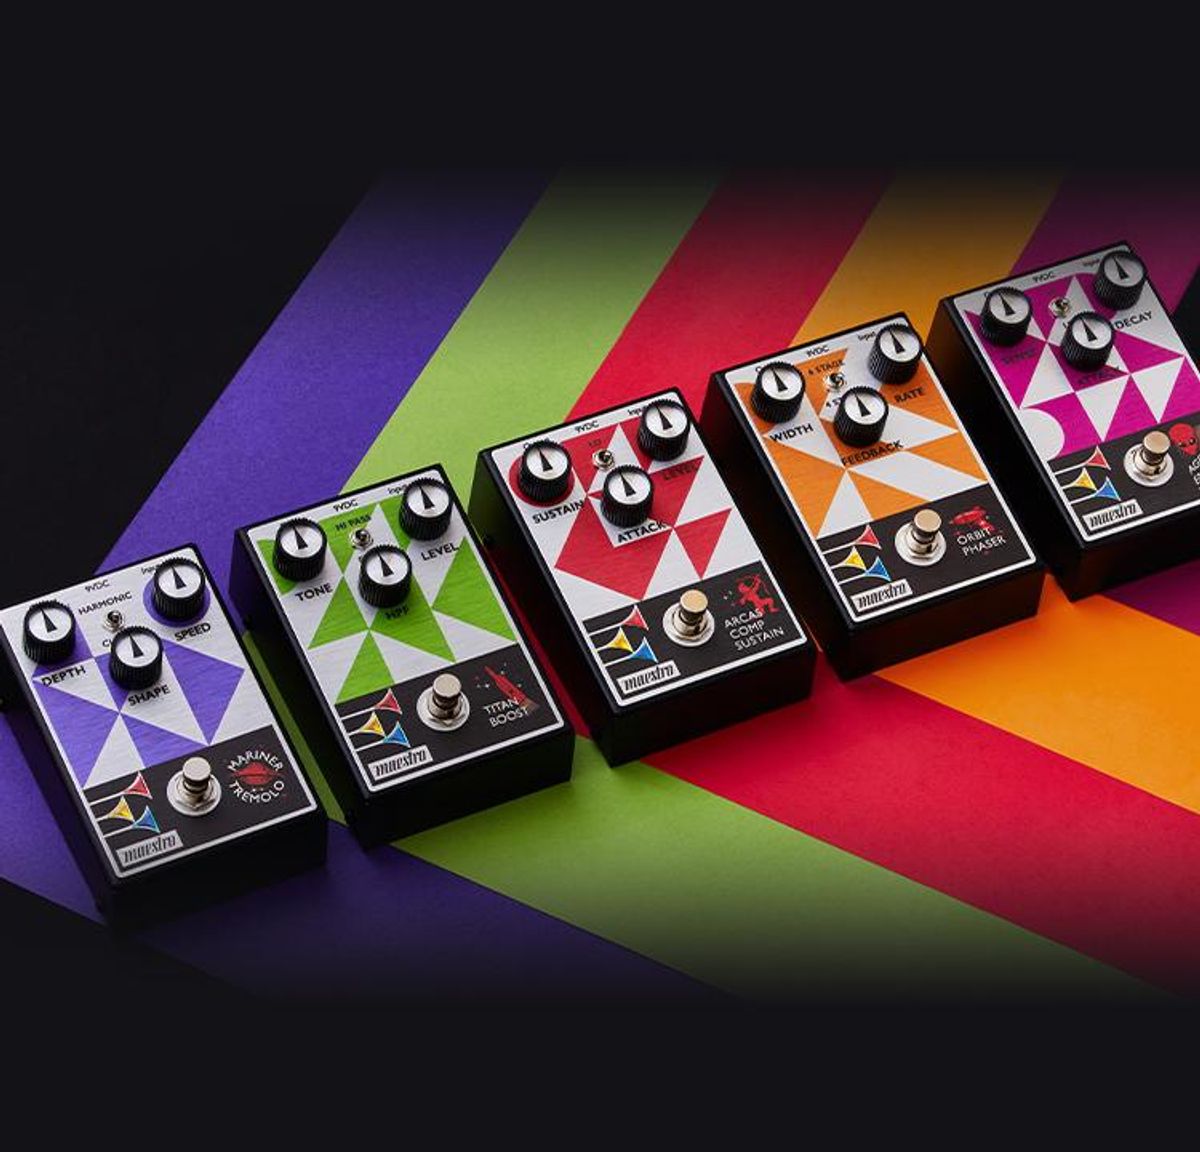 Gibson Adds 5 New Pedals to Maestro Original Collection